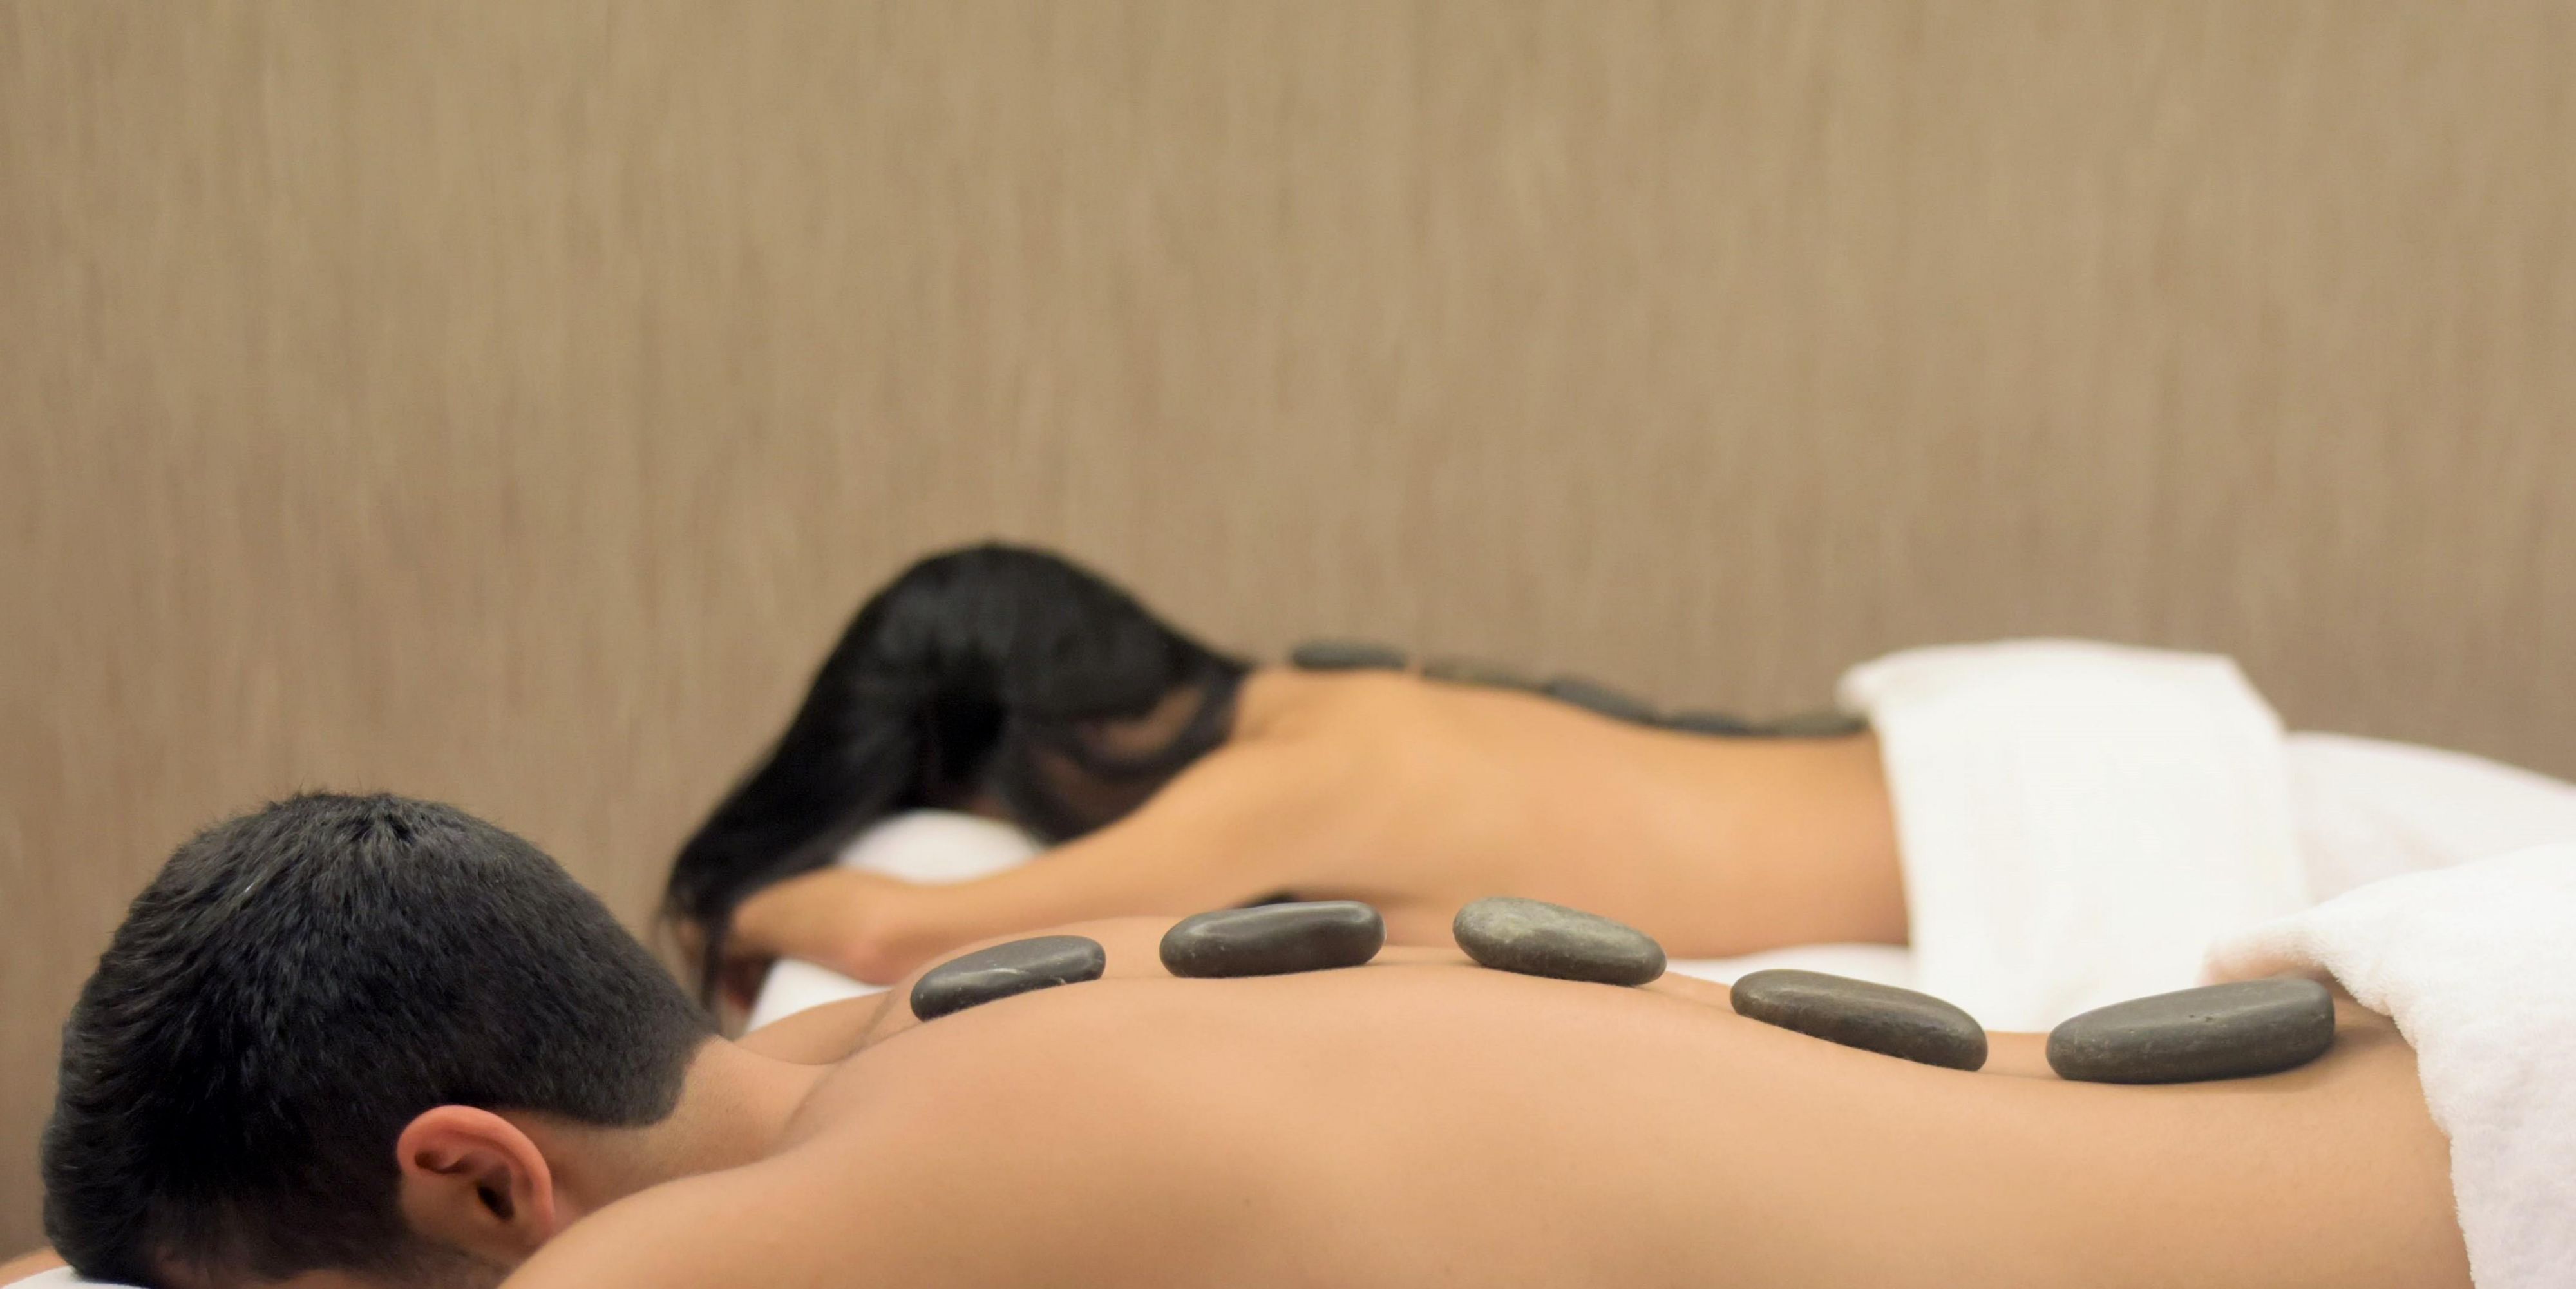 Chose from a wide selection of spa and relaxation treatments to rejoice and rejuvenate.